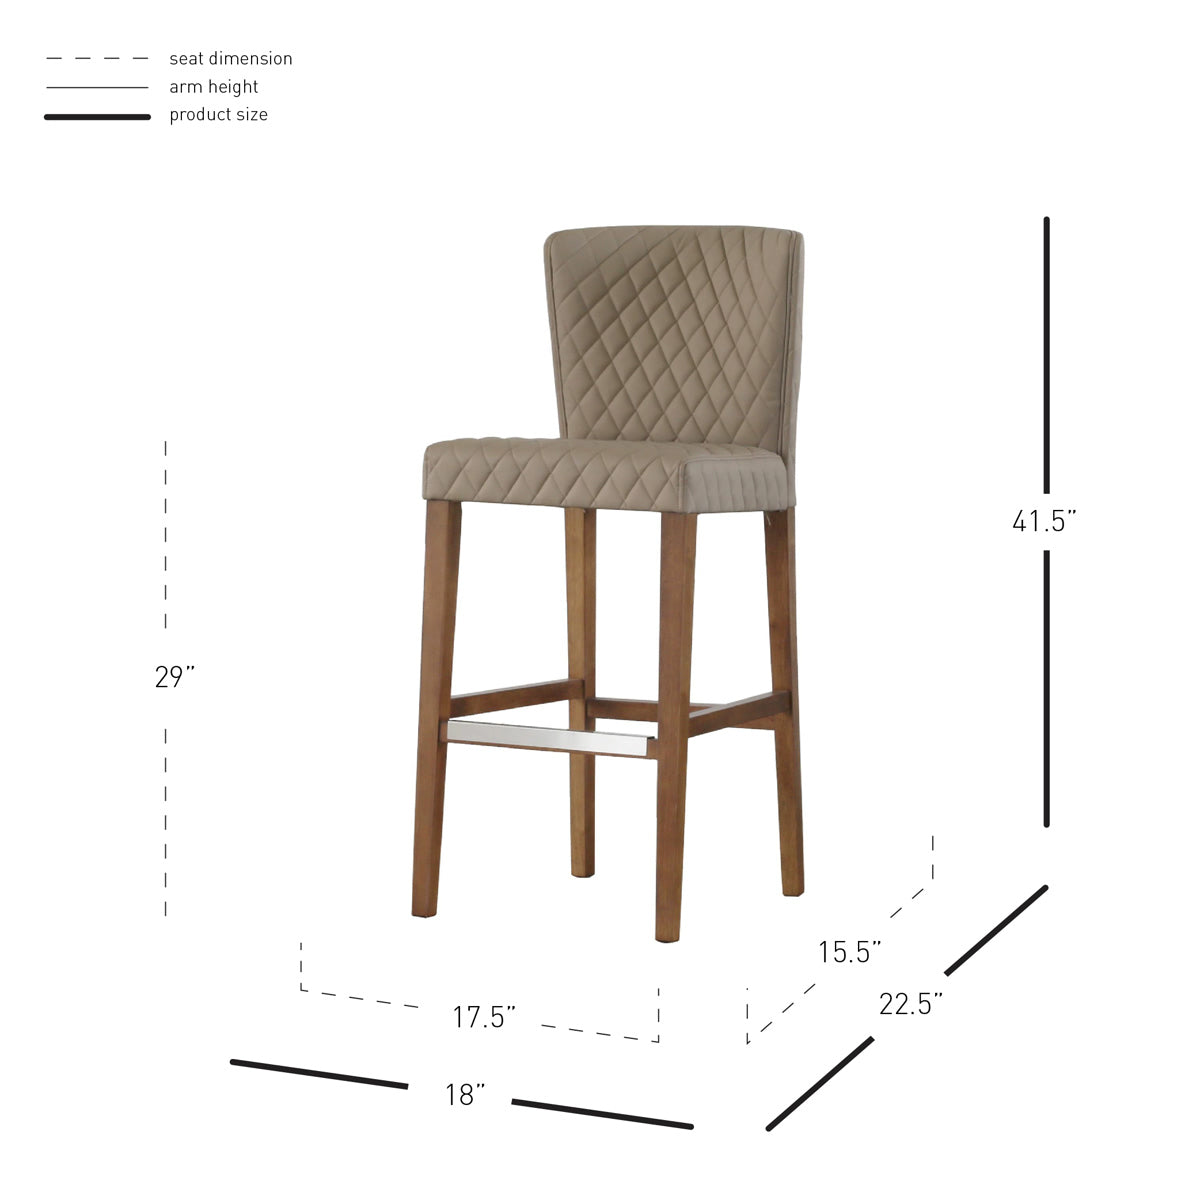 Albie Diamond Stitching PU Leather Bar Stool - Set of 2 by New Pacific Direct - 3900055-343